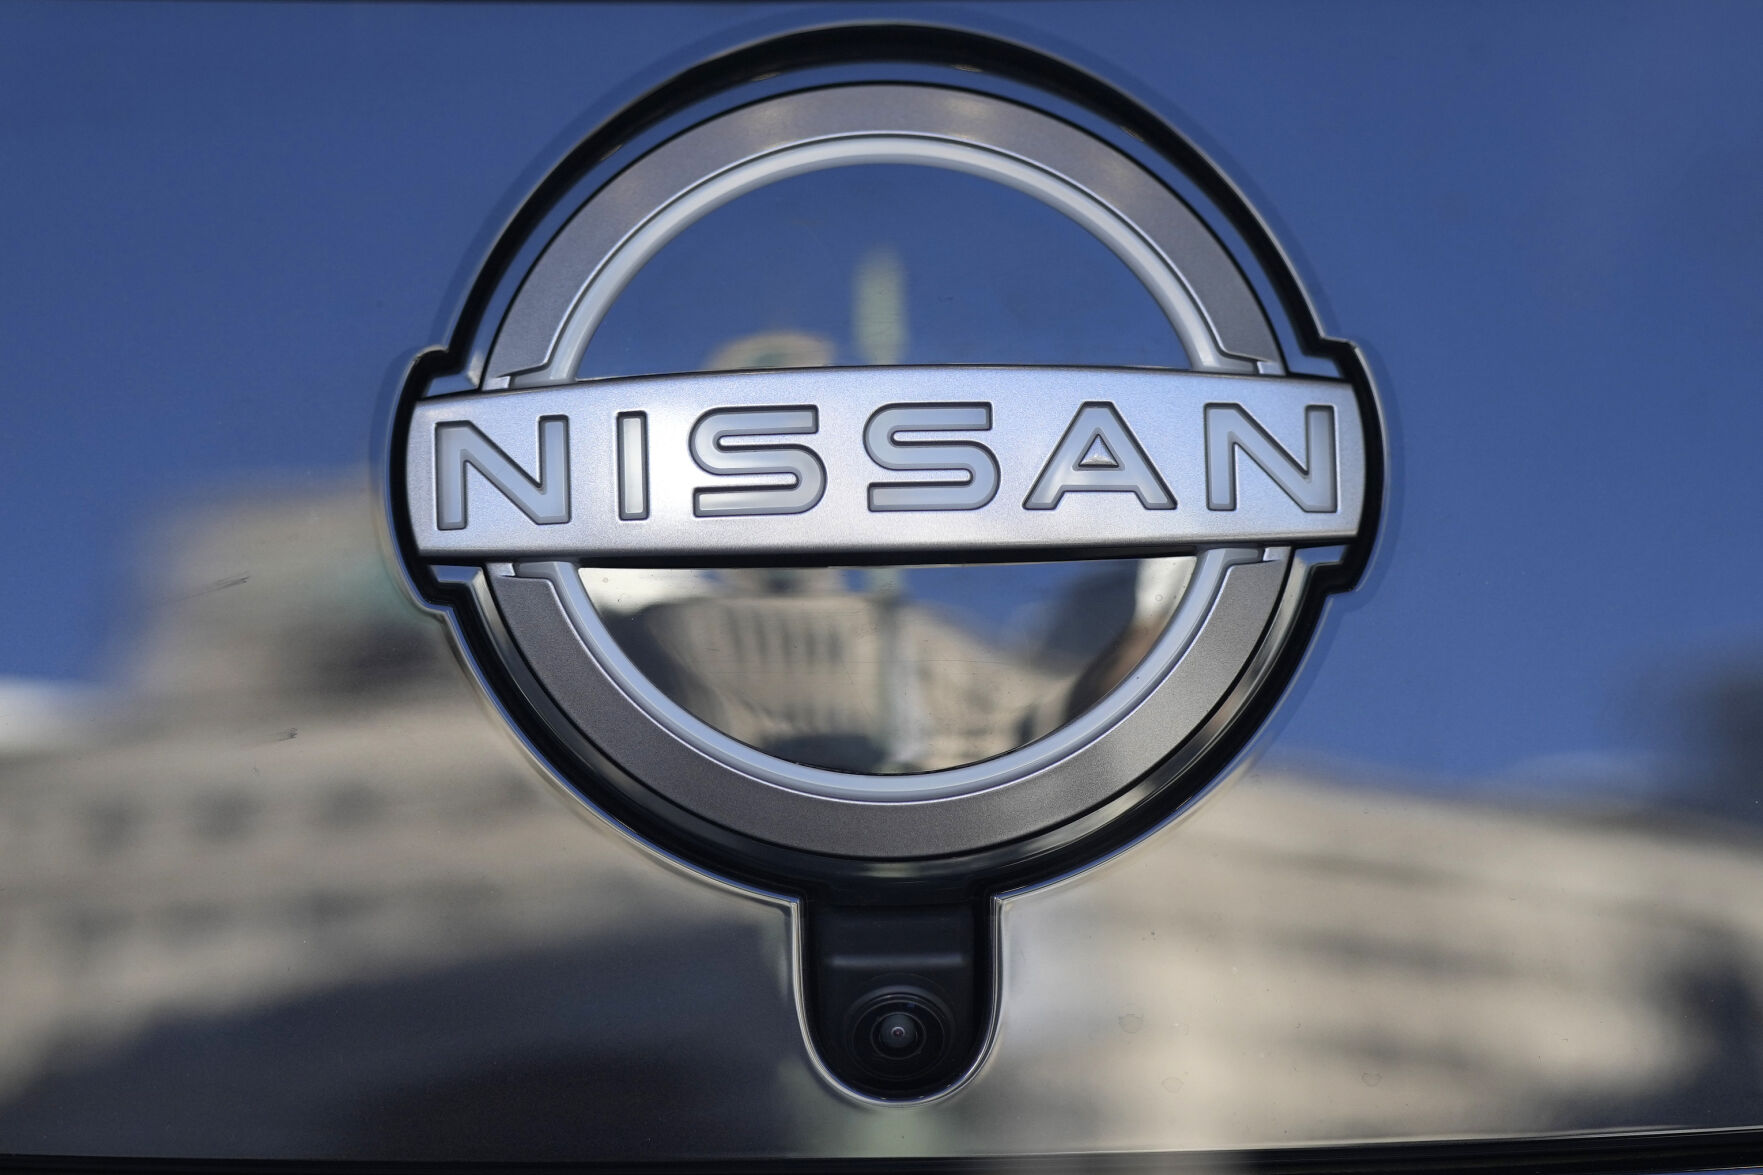 <p>FILE - A Nissan logo is seen on a car at its showroom in Tokyo, Feb. 21, 2023. Nissan is recalling more than 809,000 small SUVs in the U.S. and Canada, Tuesday, Feb. 28, because a key problem can cause the ignition to shut off while they’re being driven. The recall covers Rogues from the 2014 through 2020 model years, as well as Rogue Sports from 2017 through 2022. (AP Photo/Shuji Kajiyama, File)</p>   PHOTO CREDIT: Shuji Kajiyama 